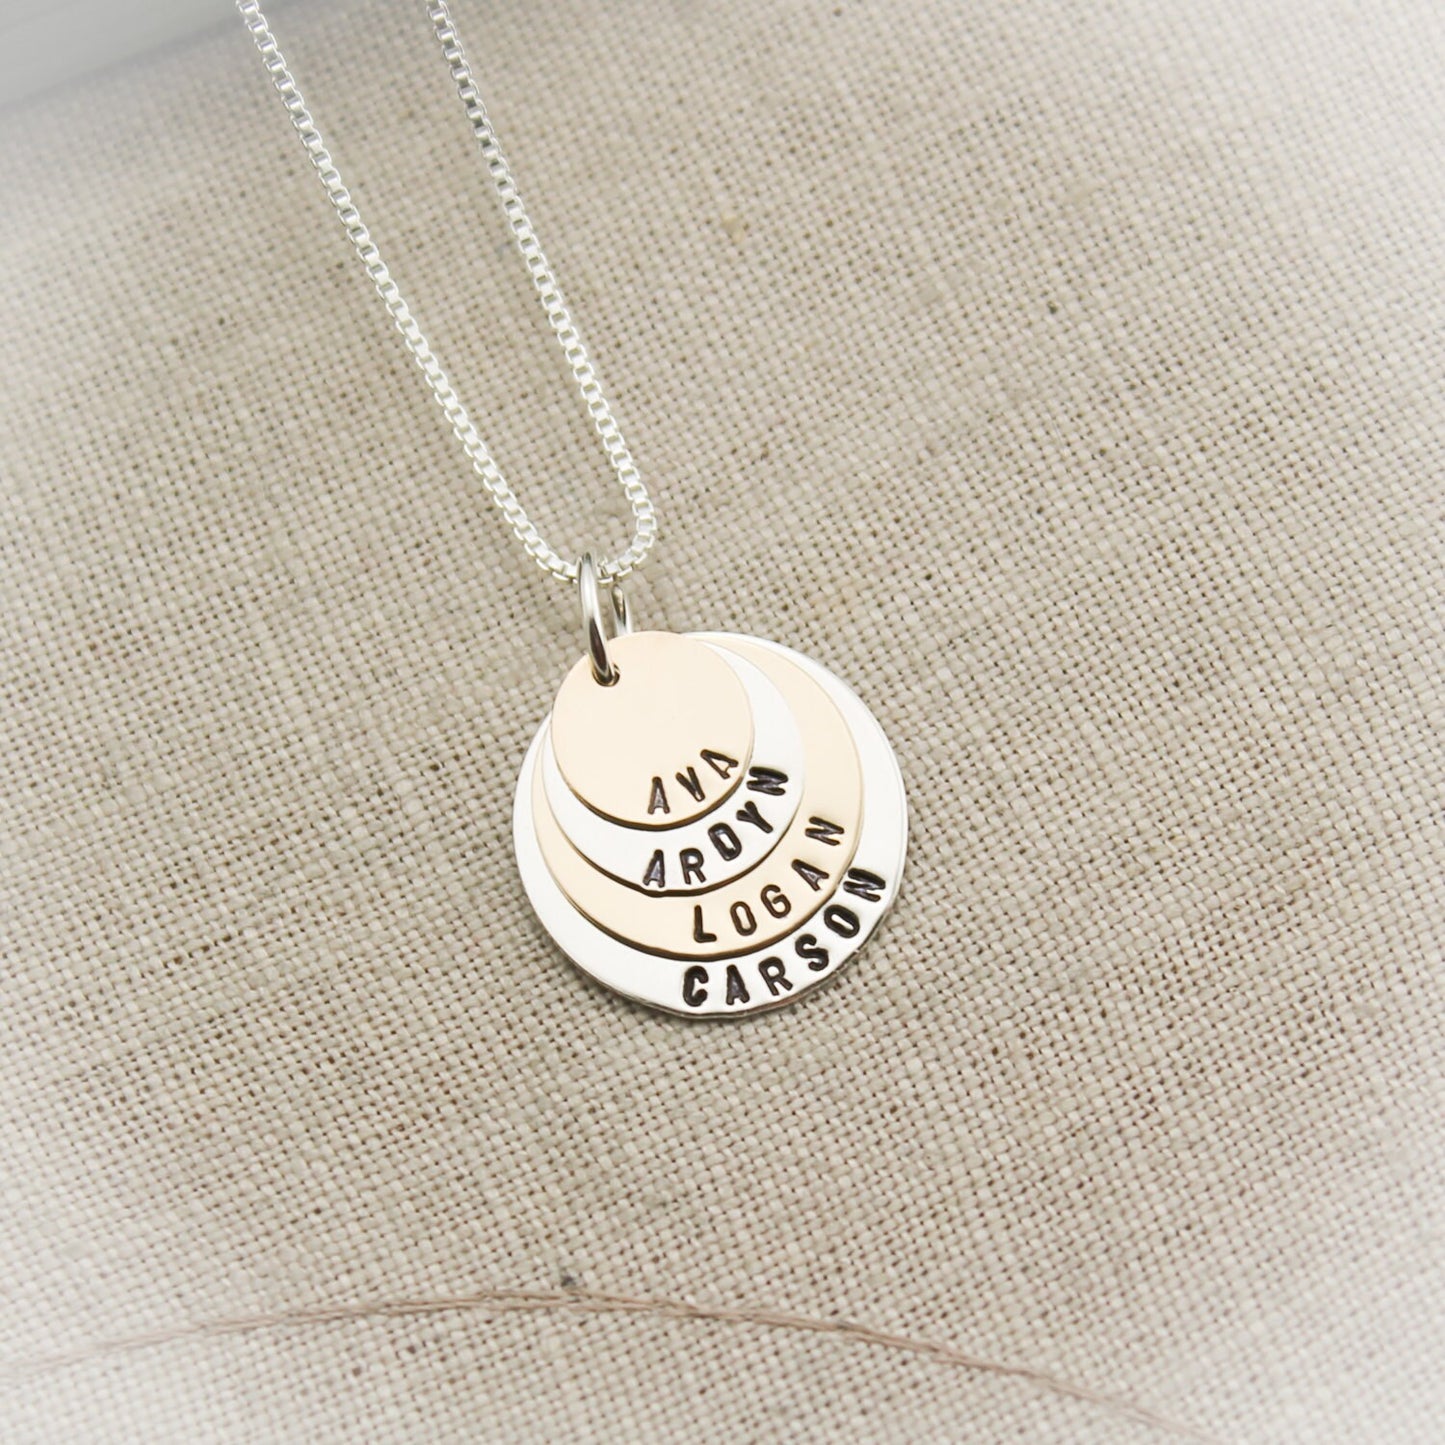 Four Tiny Layers Grandma or Mommy Layered Necklace Silver and 14K Gold Filled Personalized Necklace Hand Stamped Jewelry